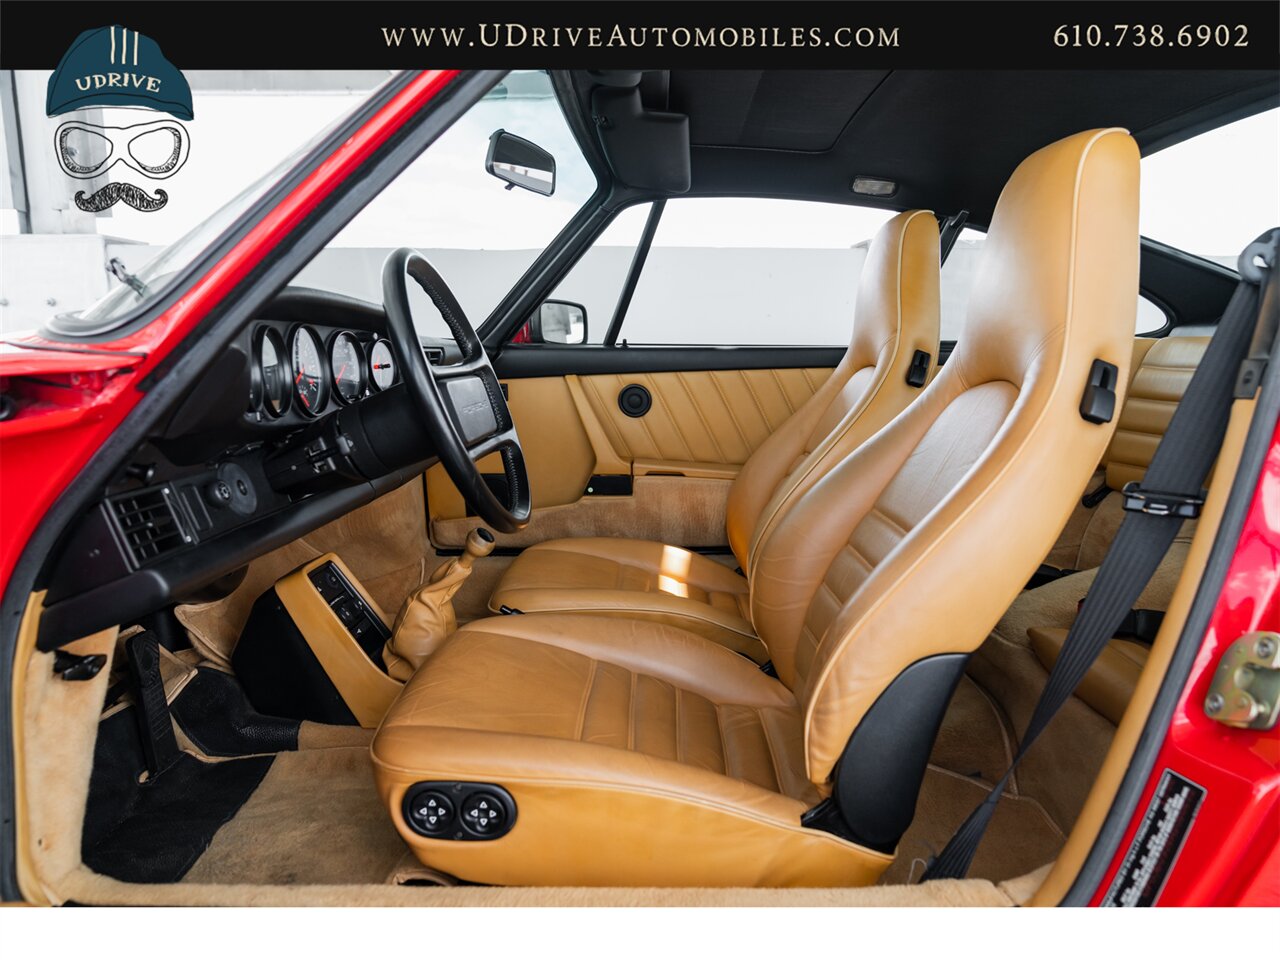 1987 Porsche 911 930 Turbo 12k Miles Guards Red over  Champagne Special Leather - Photo 29 - West Chester, PA 19382